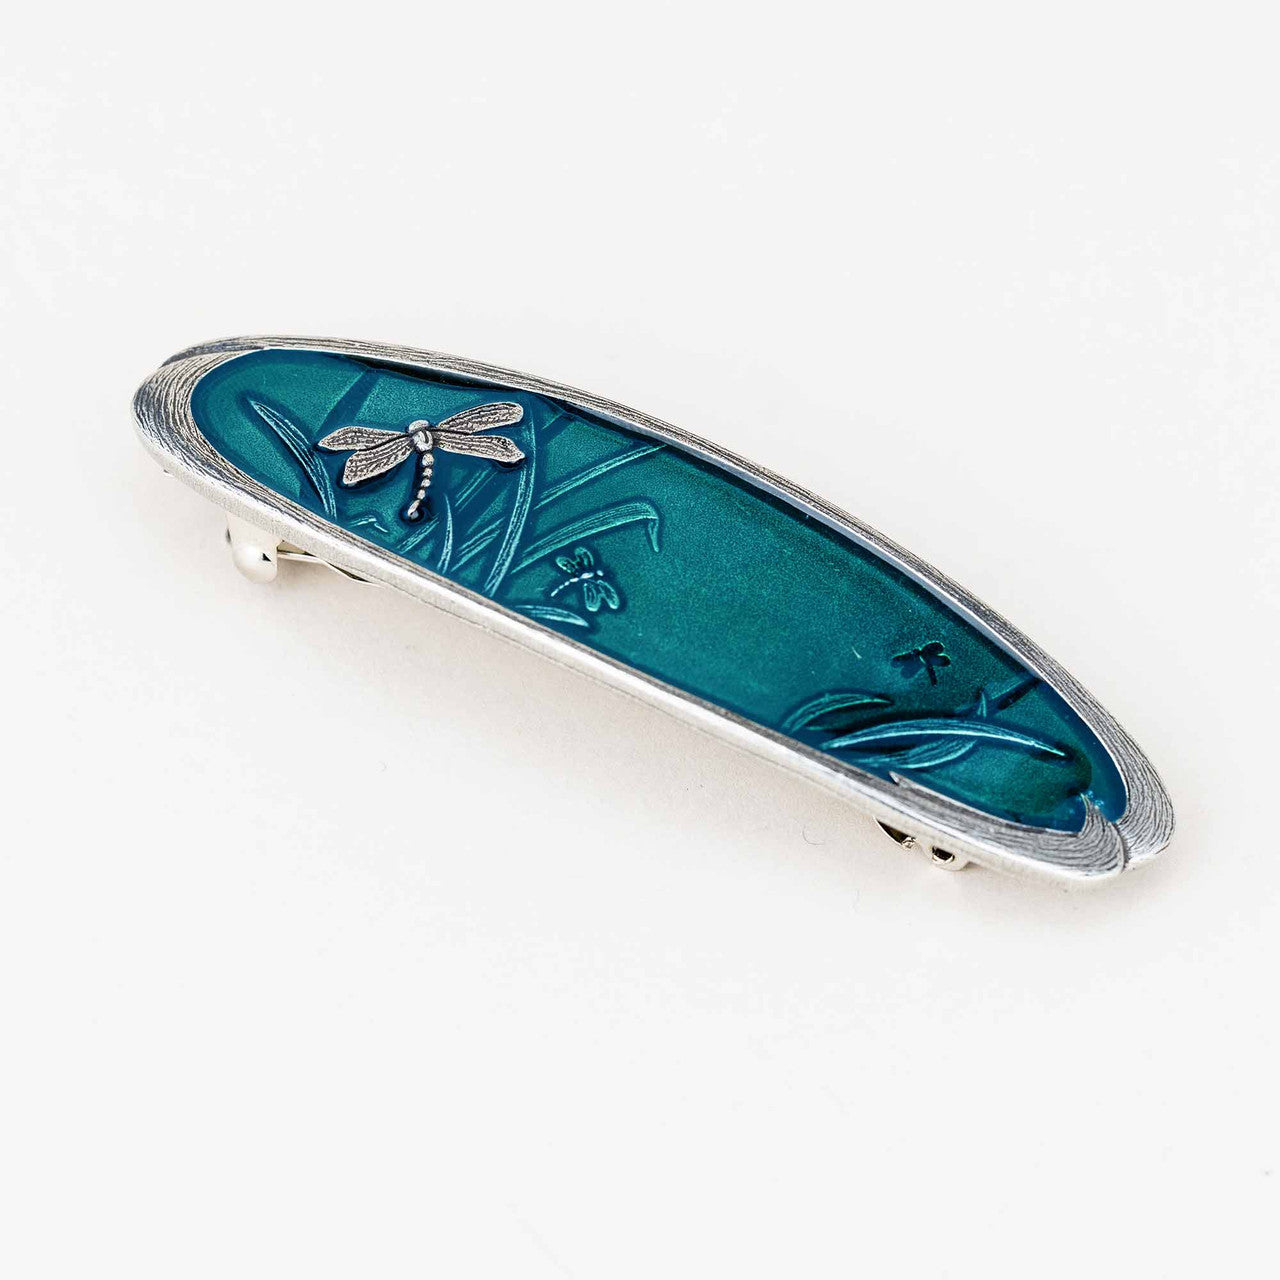 Danforth Pewter Dragonfly Teal Large Barrette. Silver butterfly with teal background. View shows french style spring clasp.